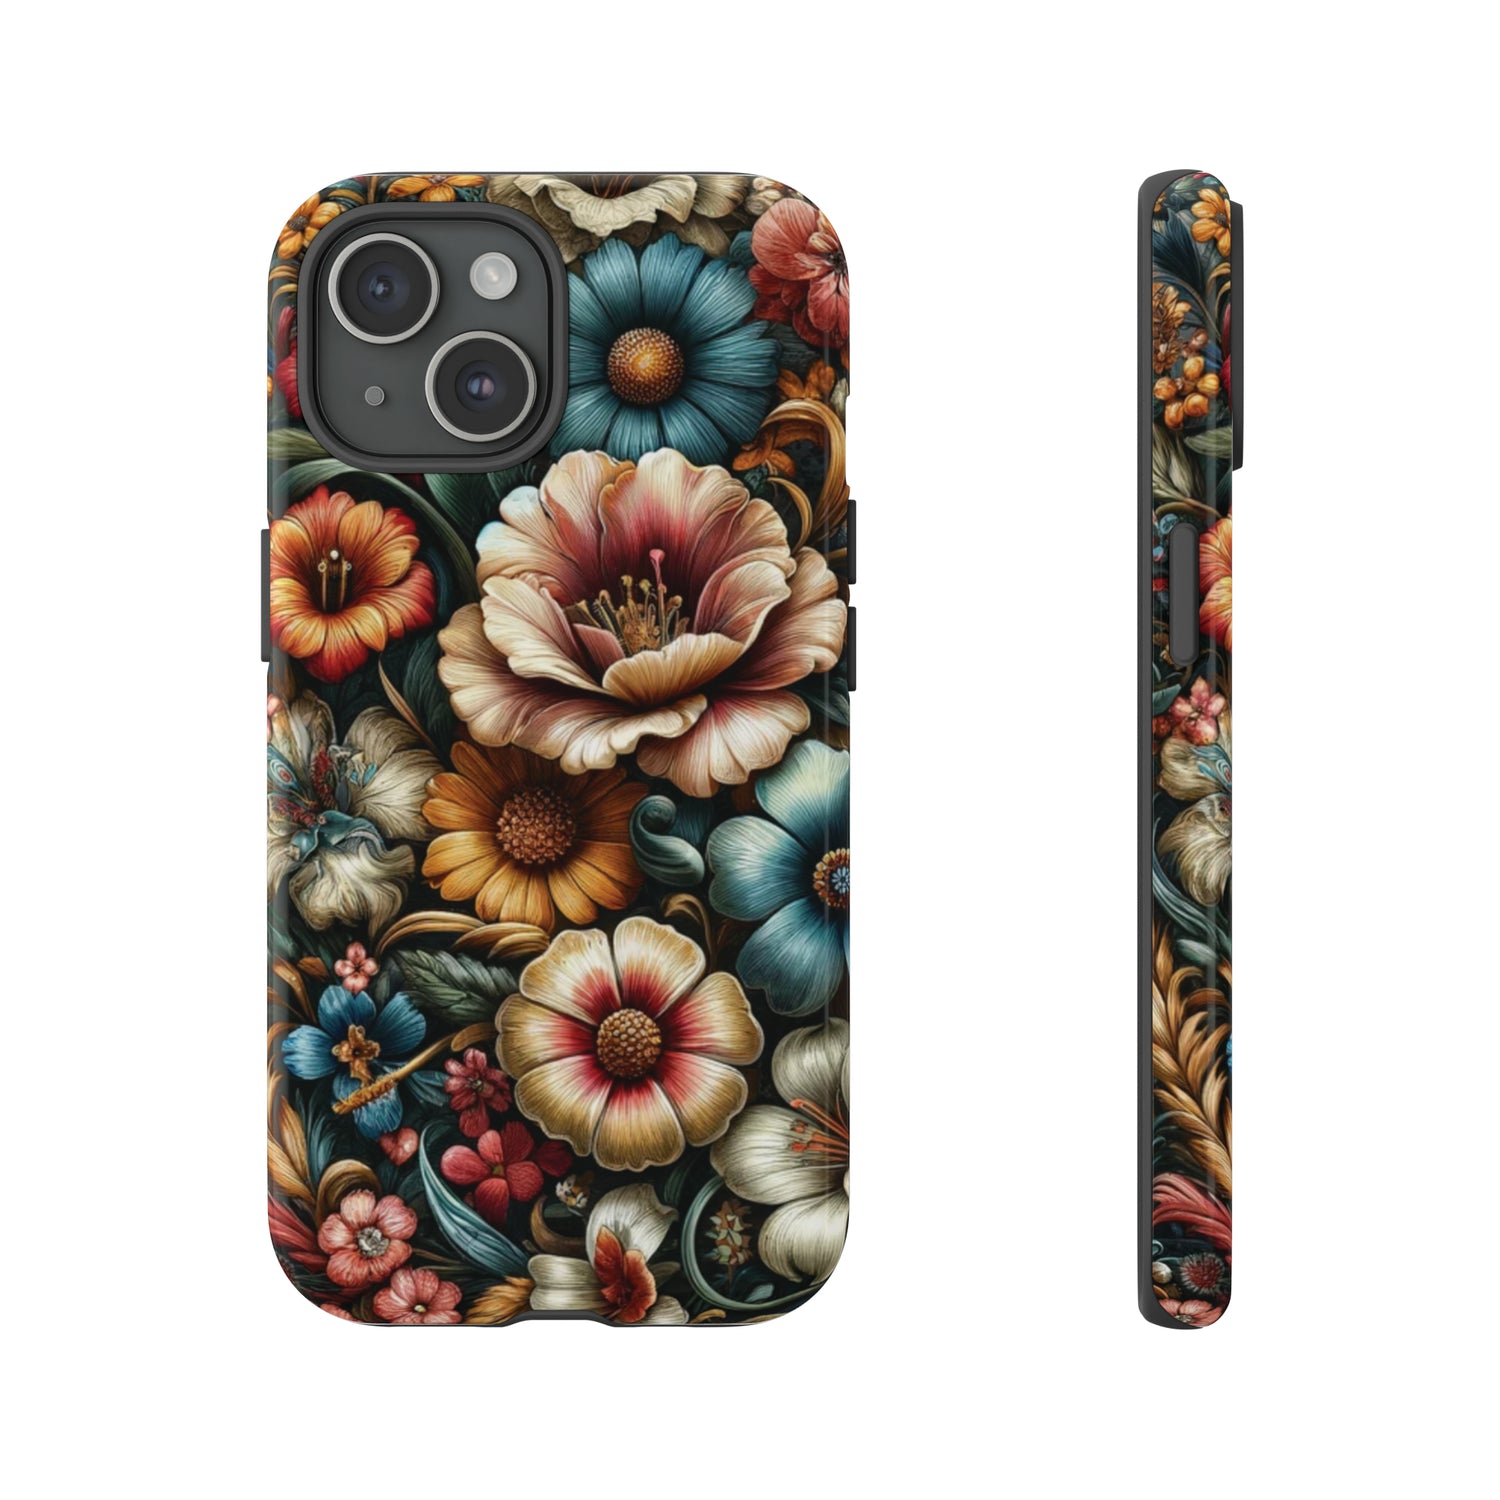 Premium collection of phone cases, meticulously designed for iPhone, Samsung Galaxy, and Google Pixel users.